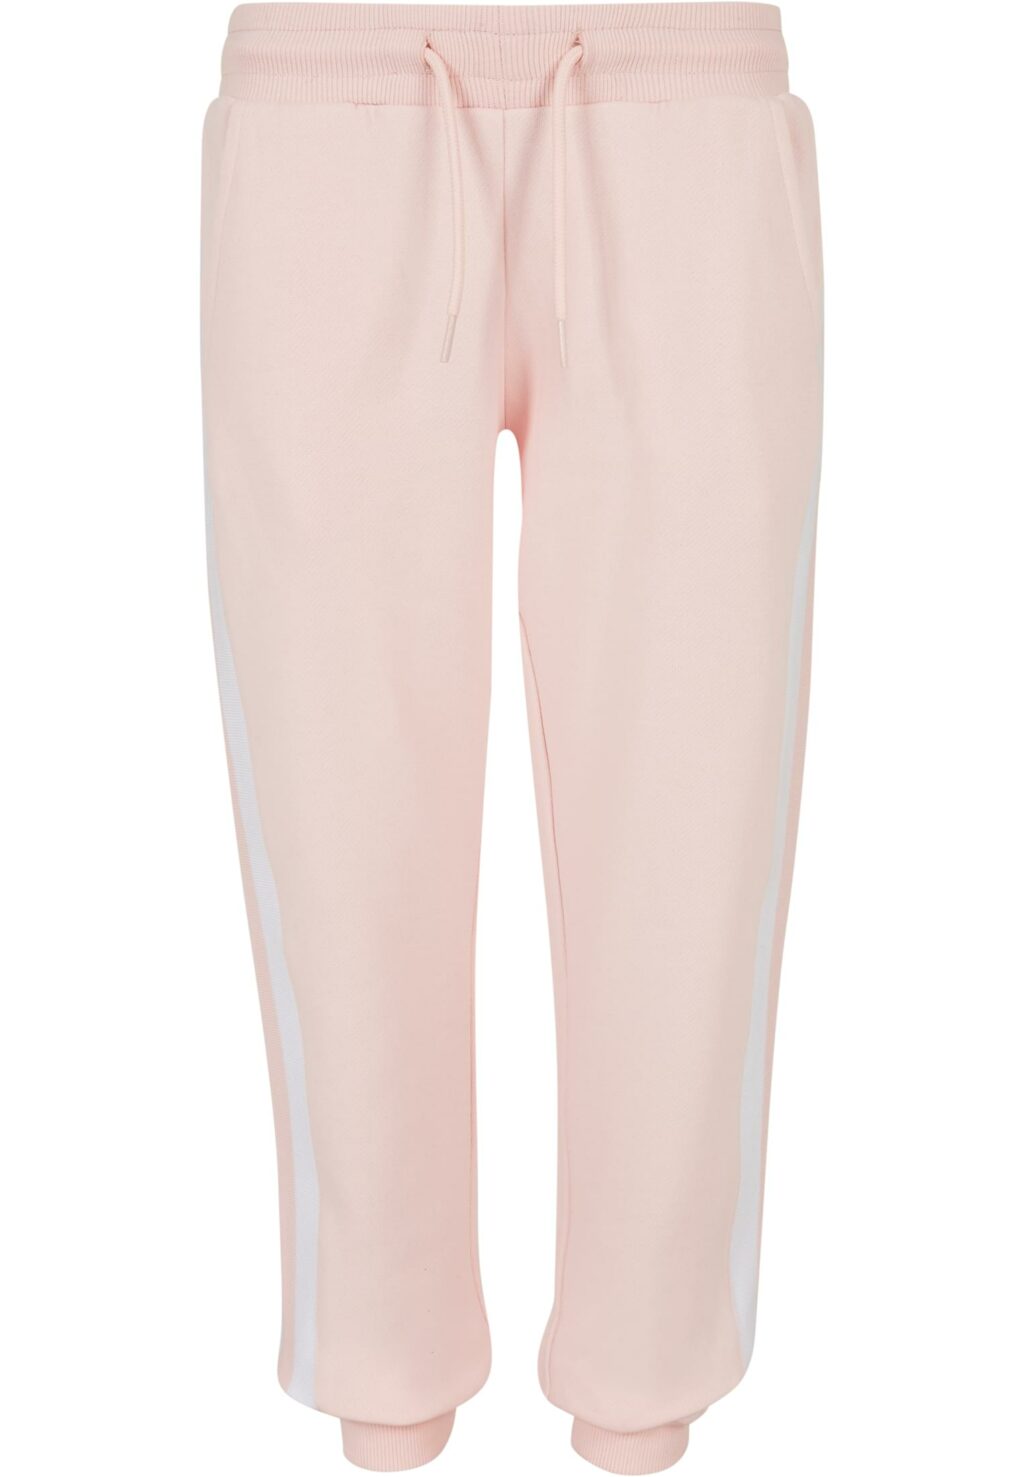 Girls College Contrast Sweatpants pink/white/pink UCK2453